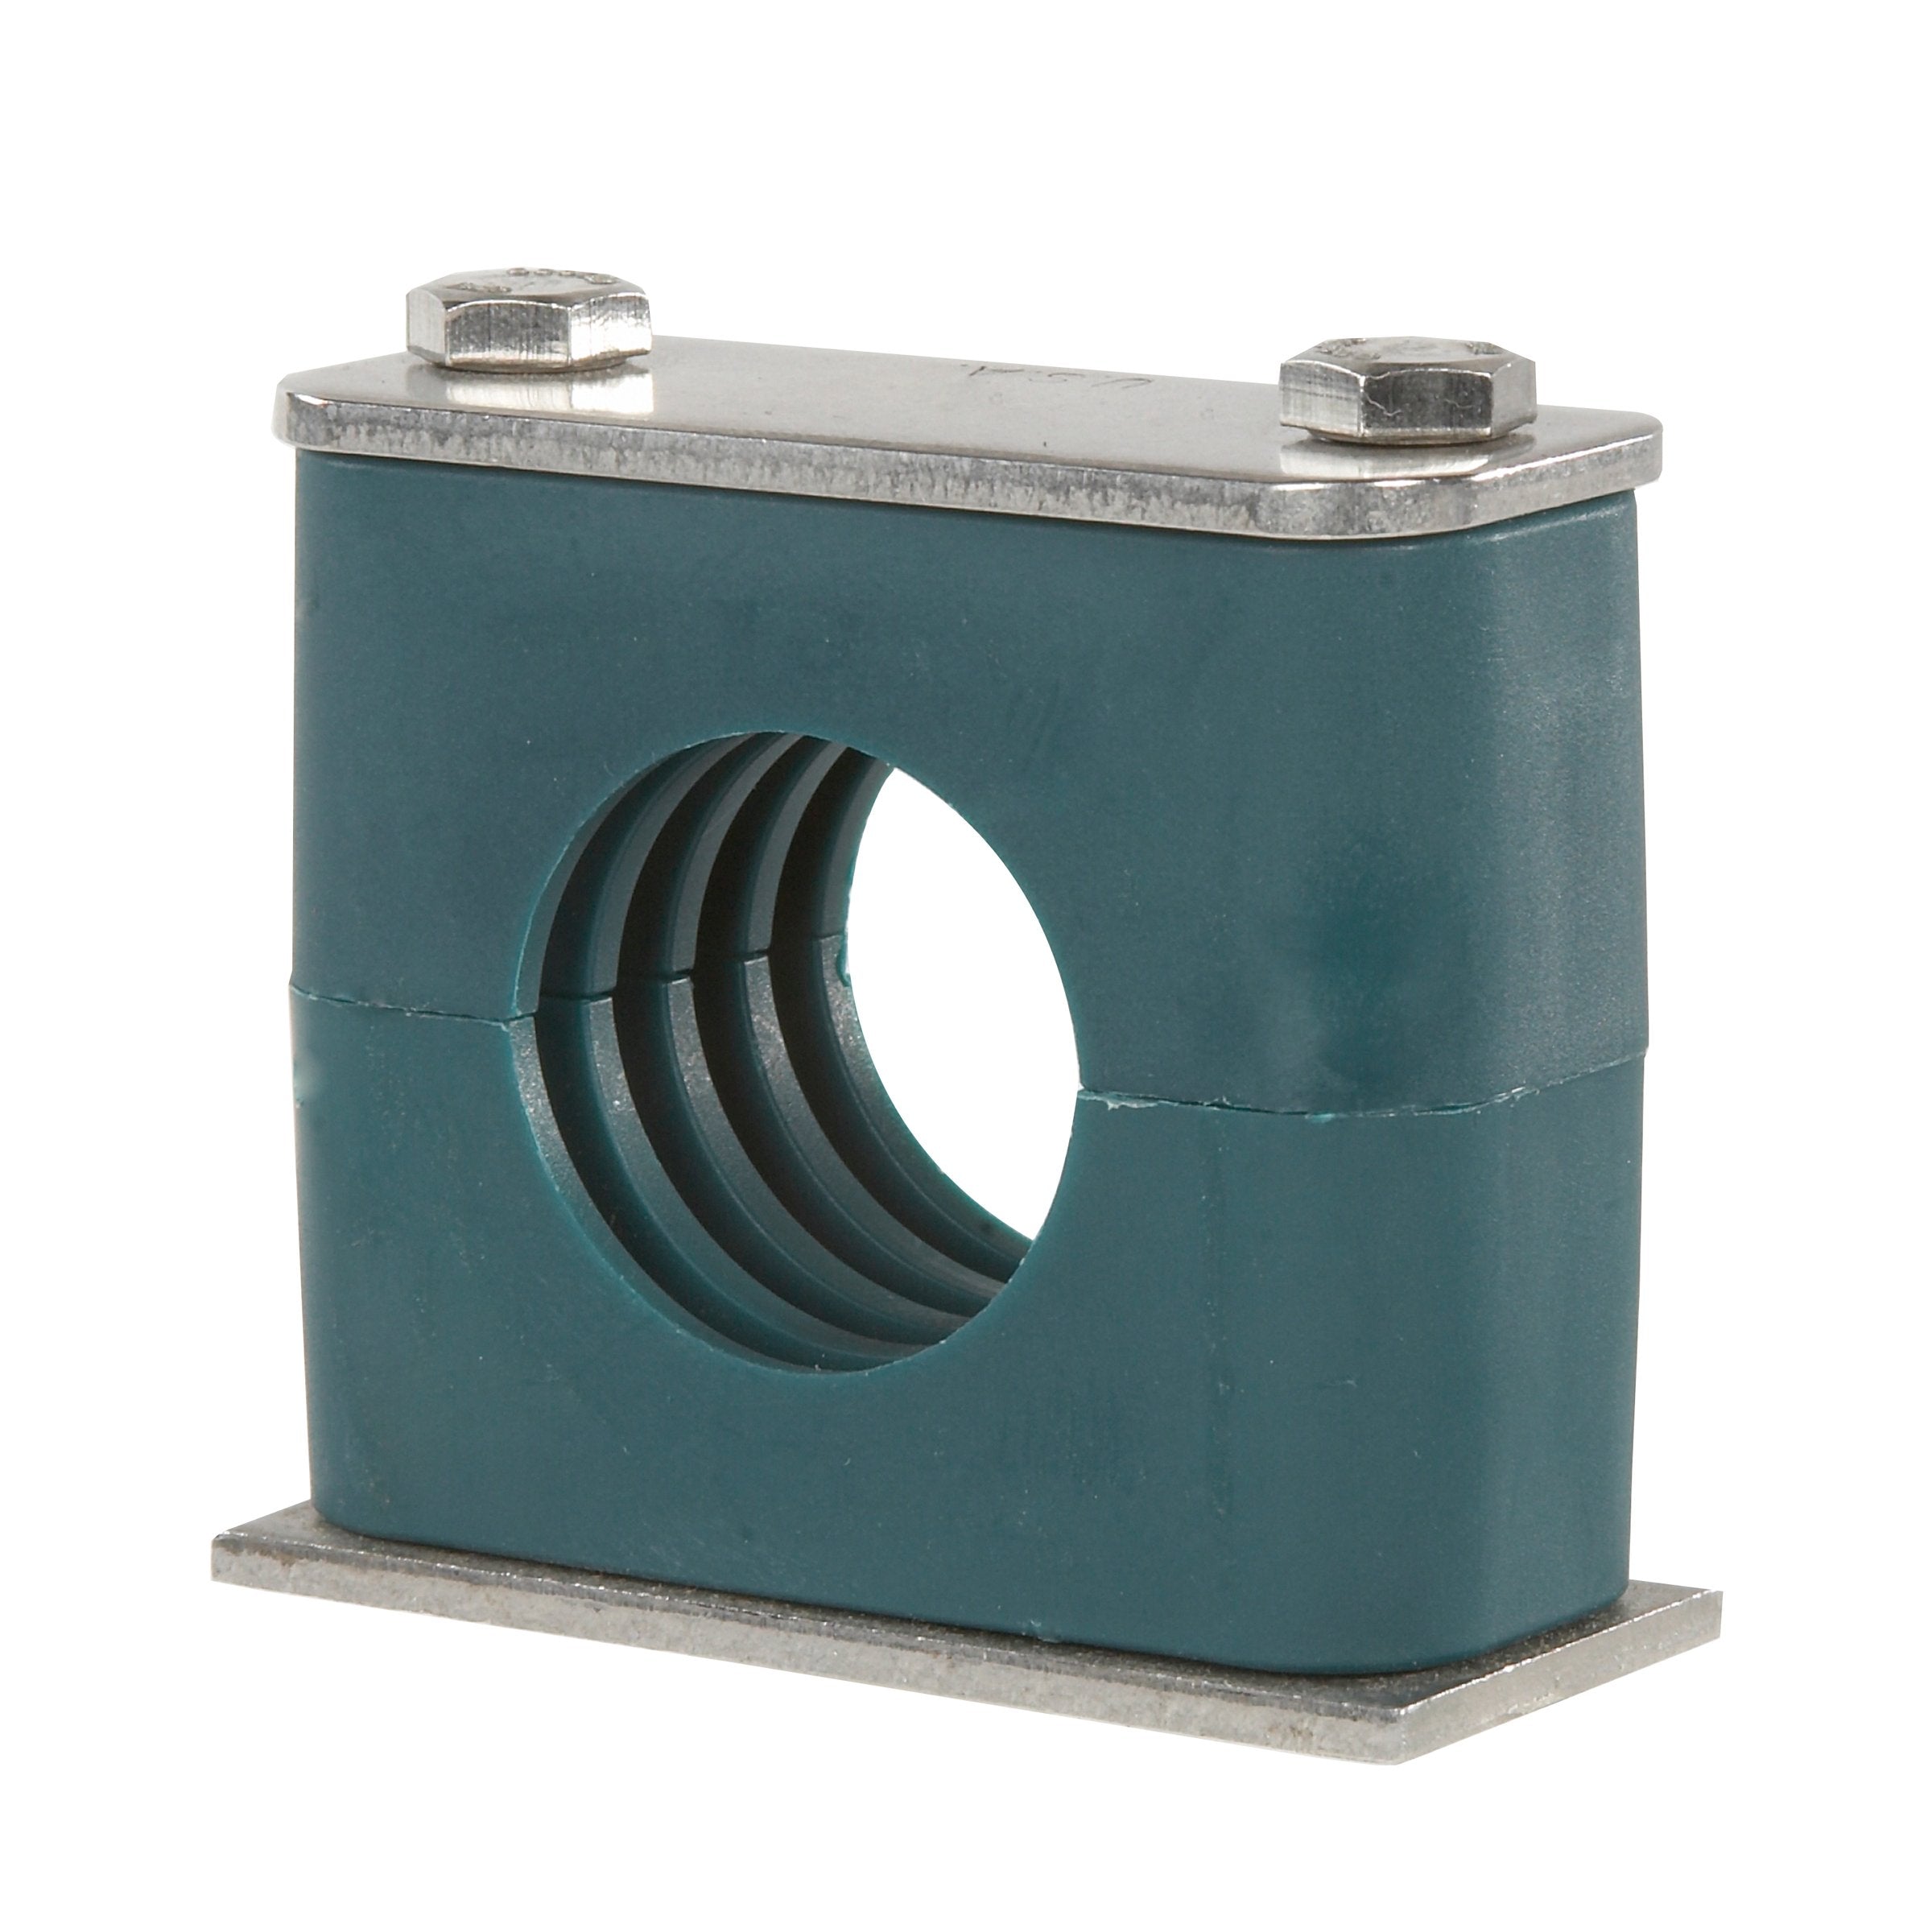 SP-888.9-PP-DP-AS-U-W10 : Stauff Clamp, Single Weld Plate, 3.5" (88.9mm) OD, for 3" Pipe, Green PP Insert, Profiled Interior, Carbon Steel